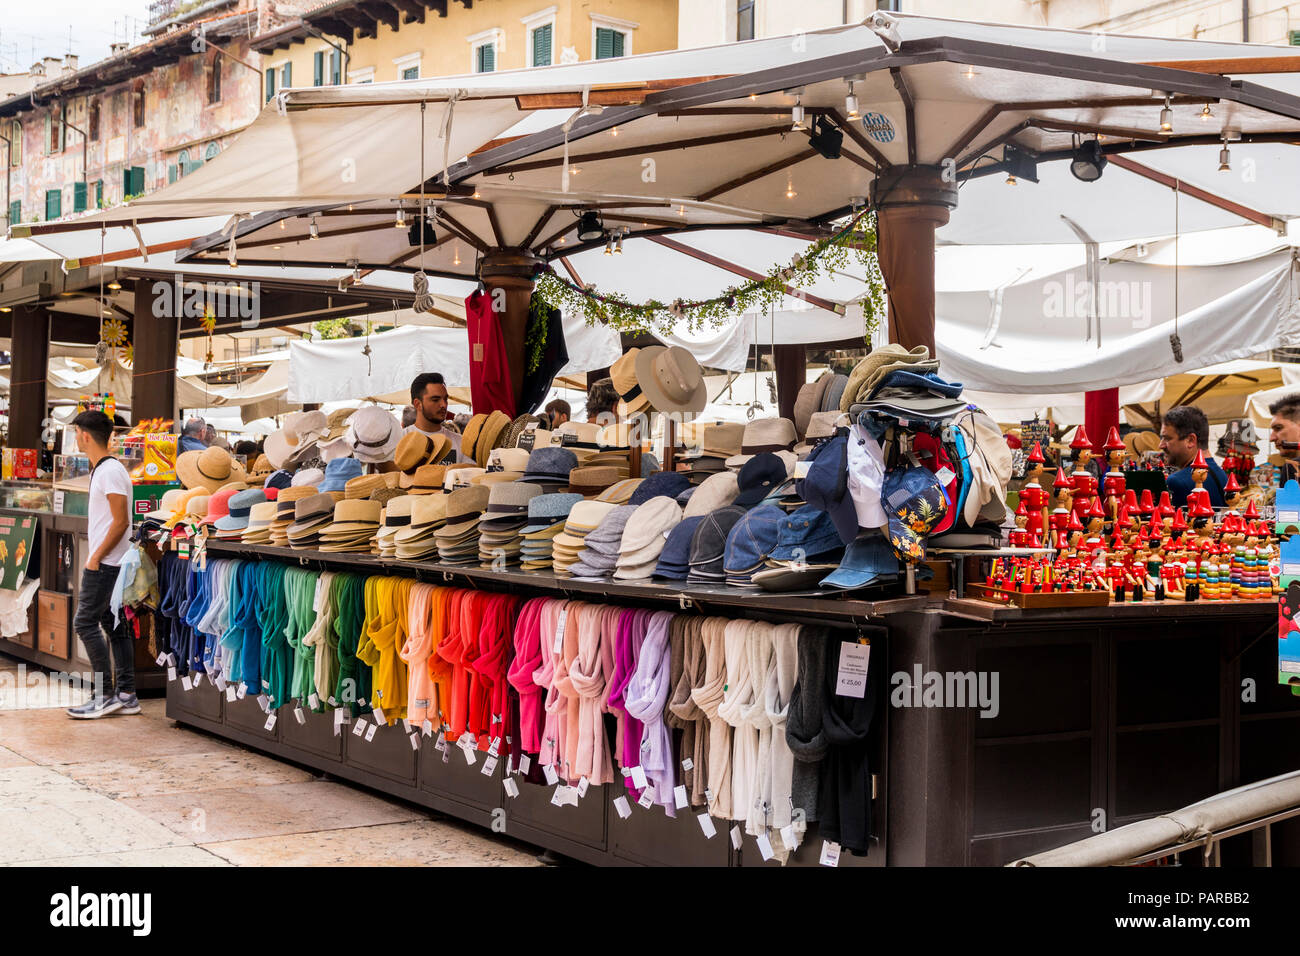 Hat stall, scarf stall, Hat and Scarf stall, fedora hats, cashmere scarves, Italian Market,Verona Italy Stock Photo